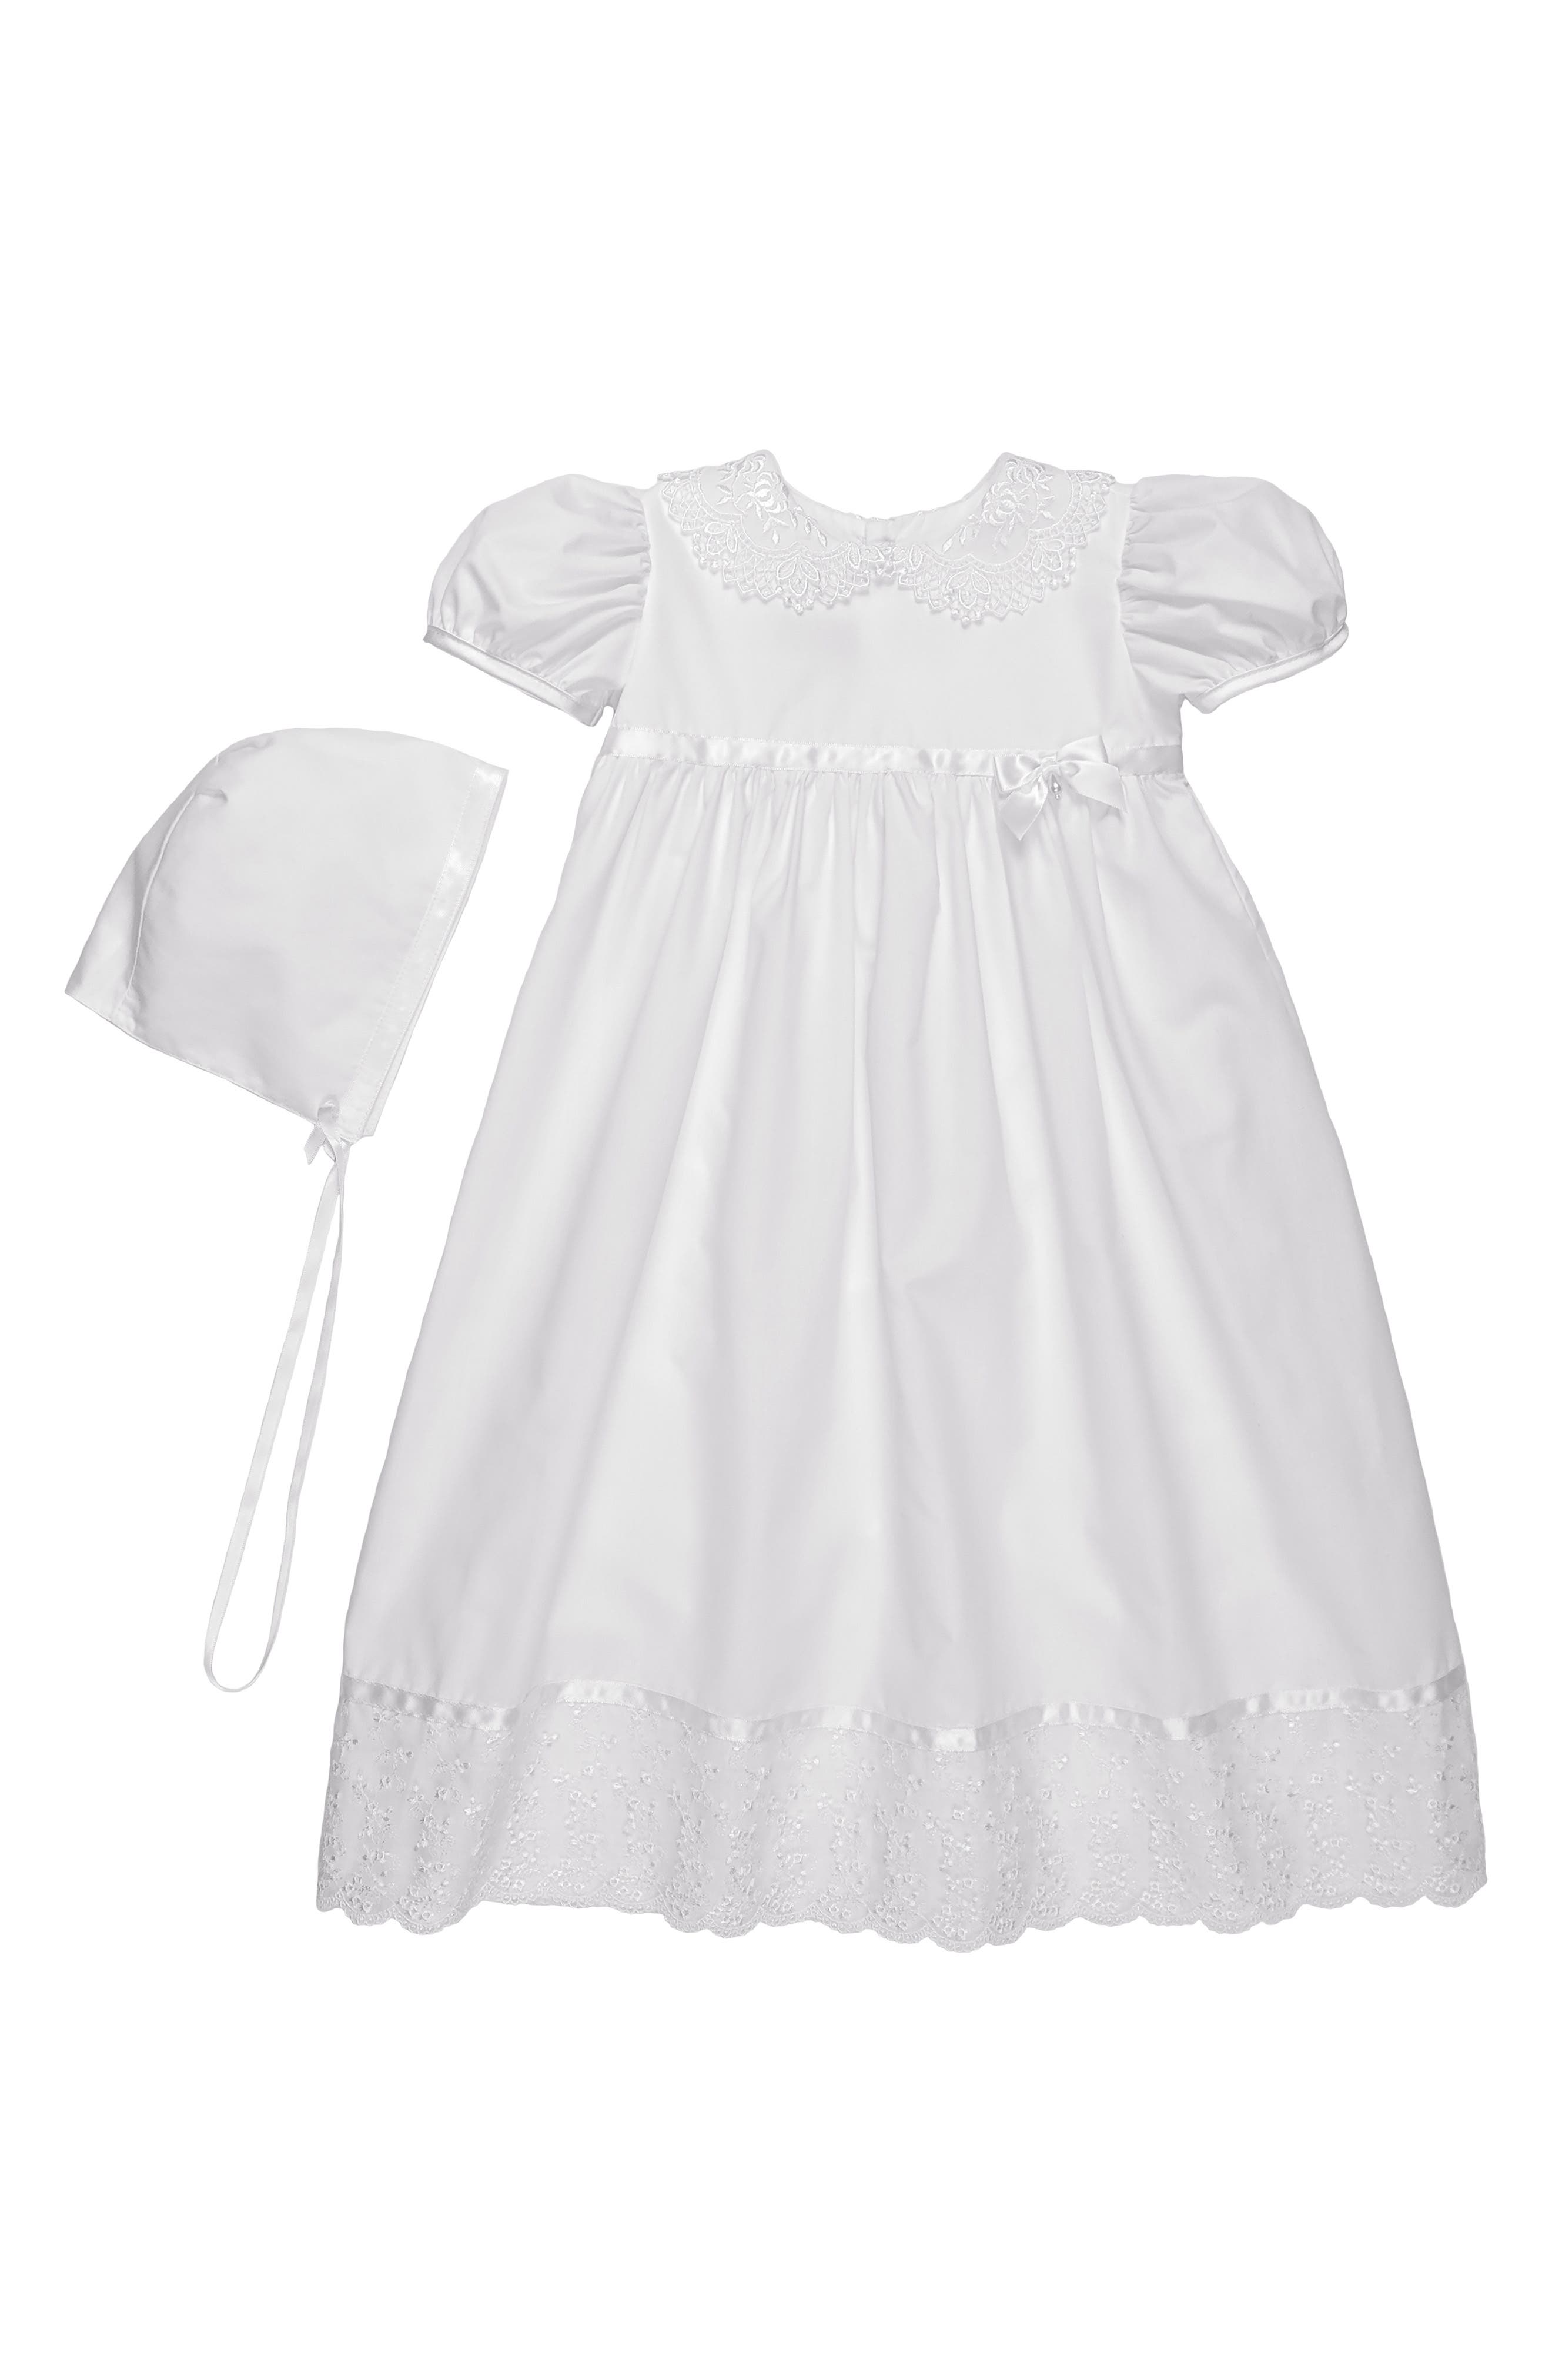 christening gown canada